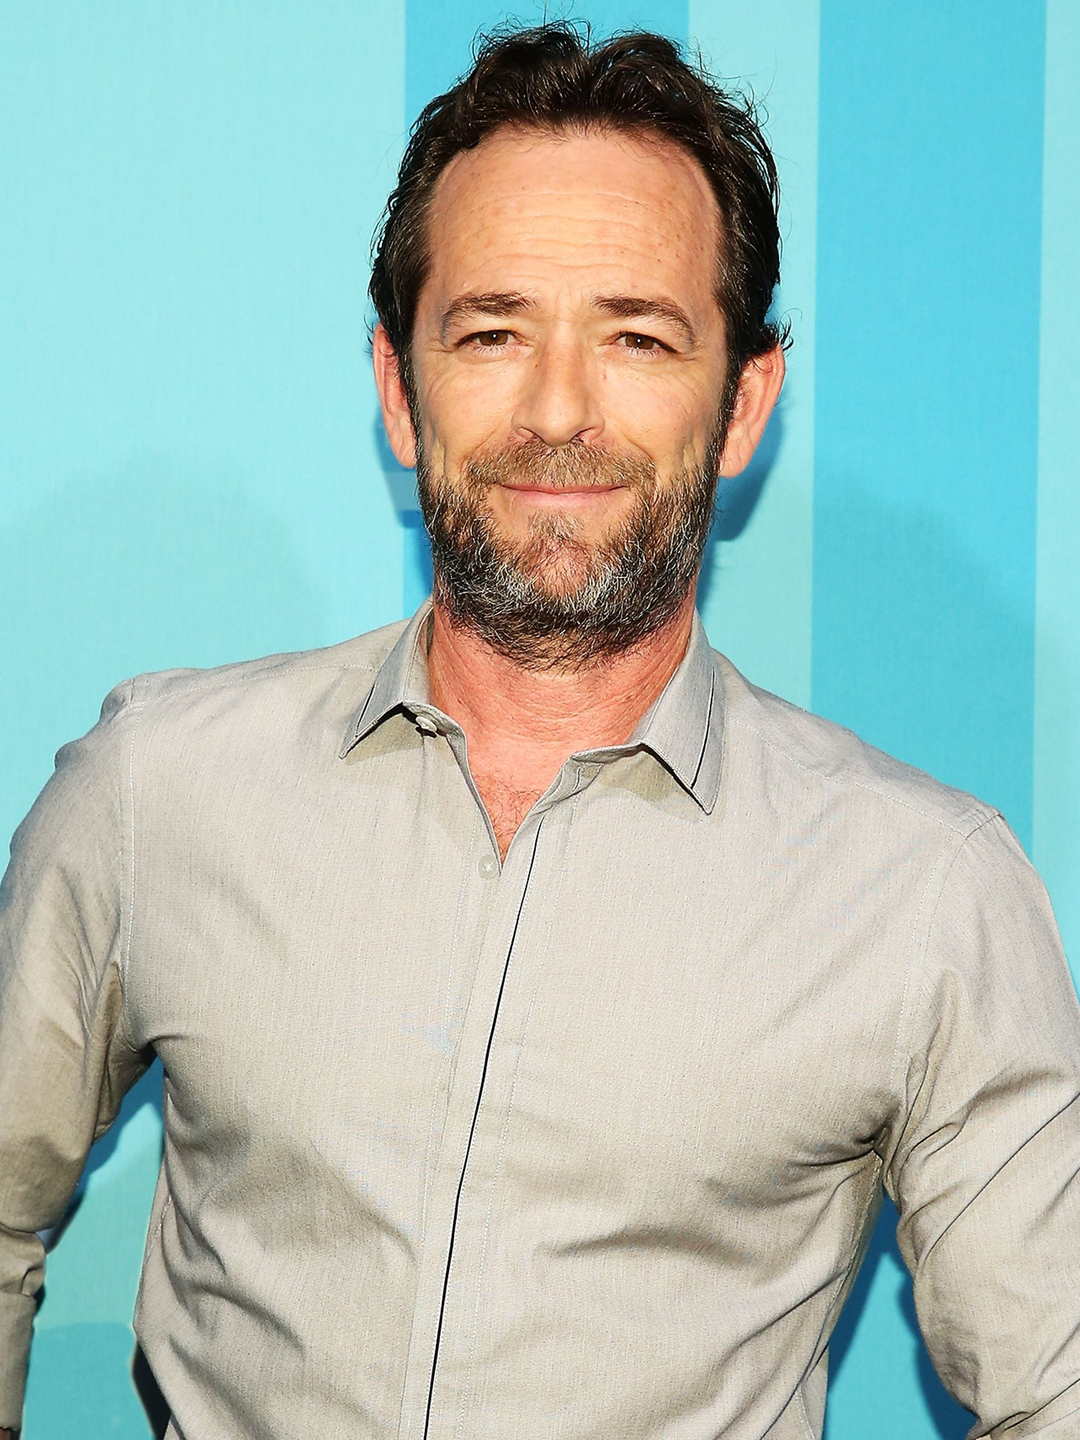 Luke Perry young photos